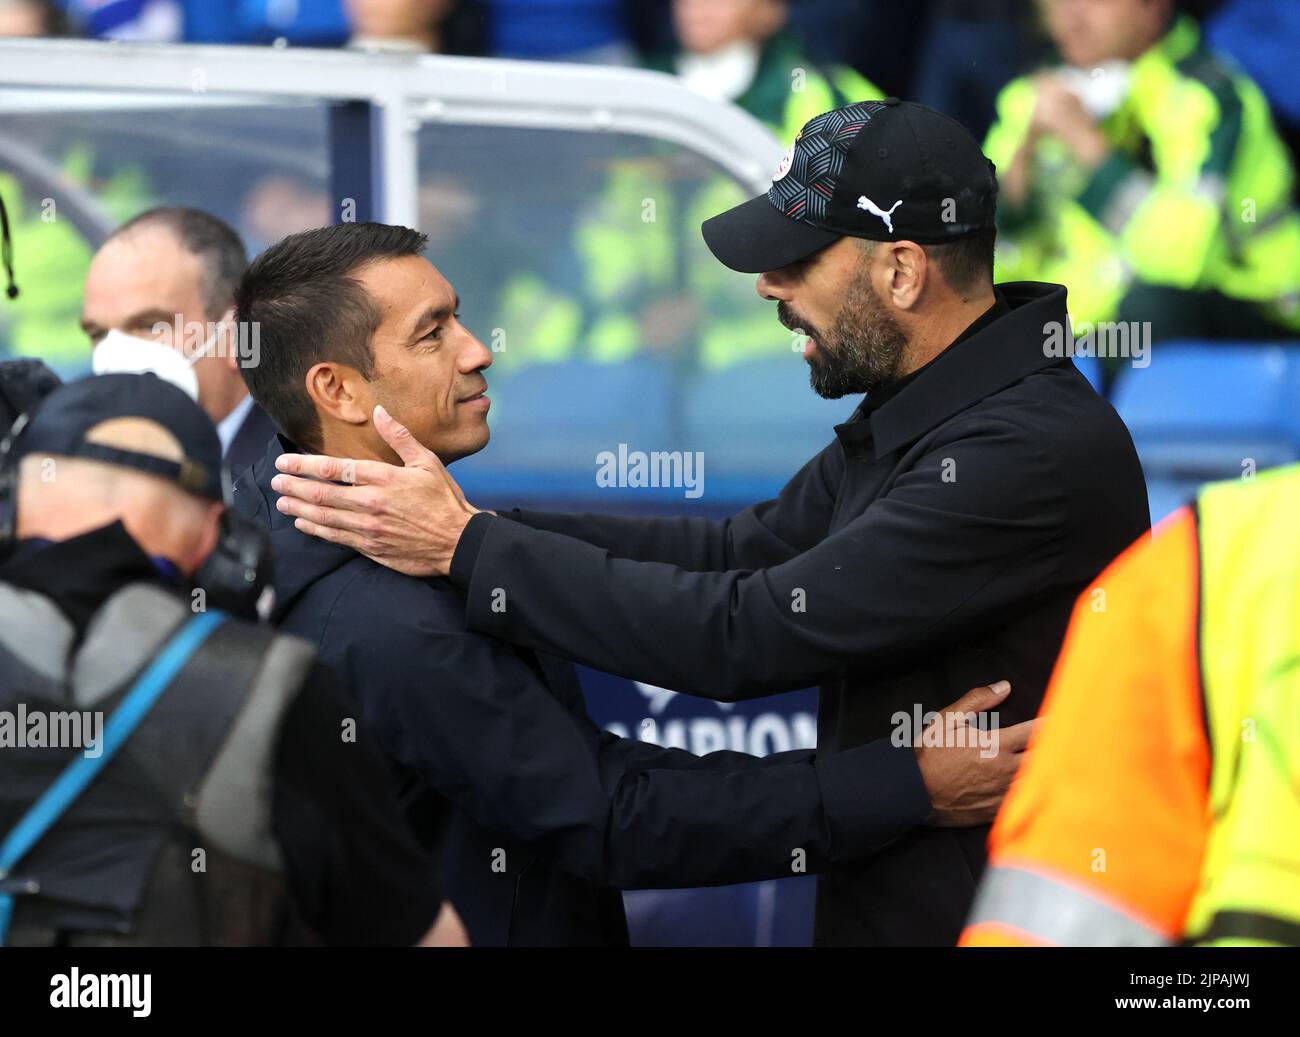 Rangers manager Giovanni van Bronckhorst greets PSV Eindhoven manager Ruud van Nistelrooy during the Champions League qualifying match at Ibrox, Glasgow. Picture date: Tuesday August 16, 2022. Stock Photo